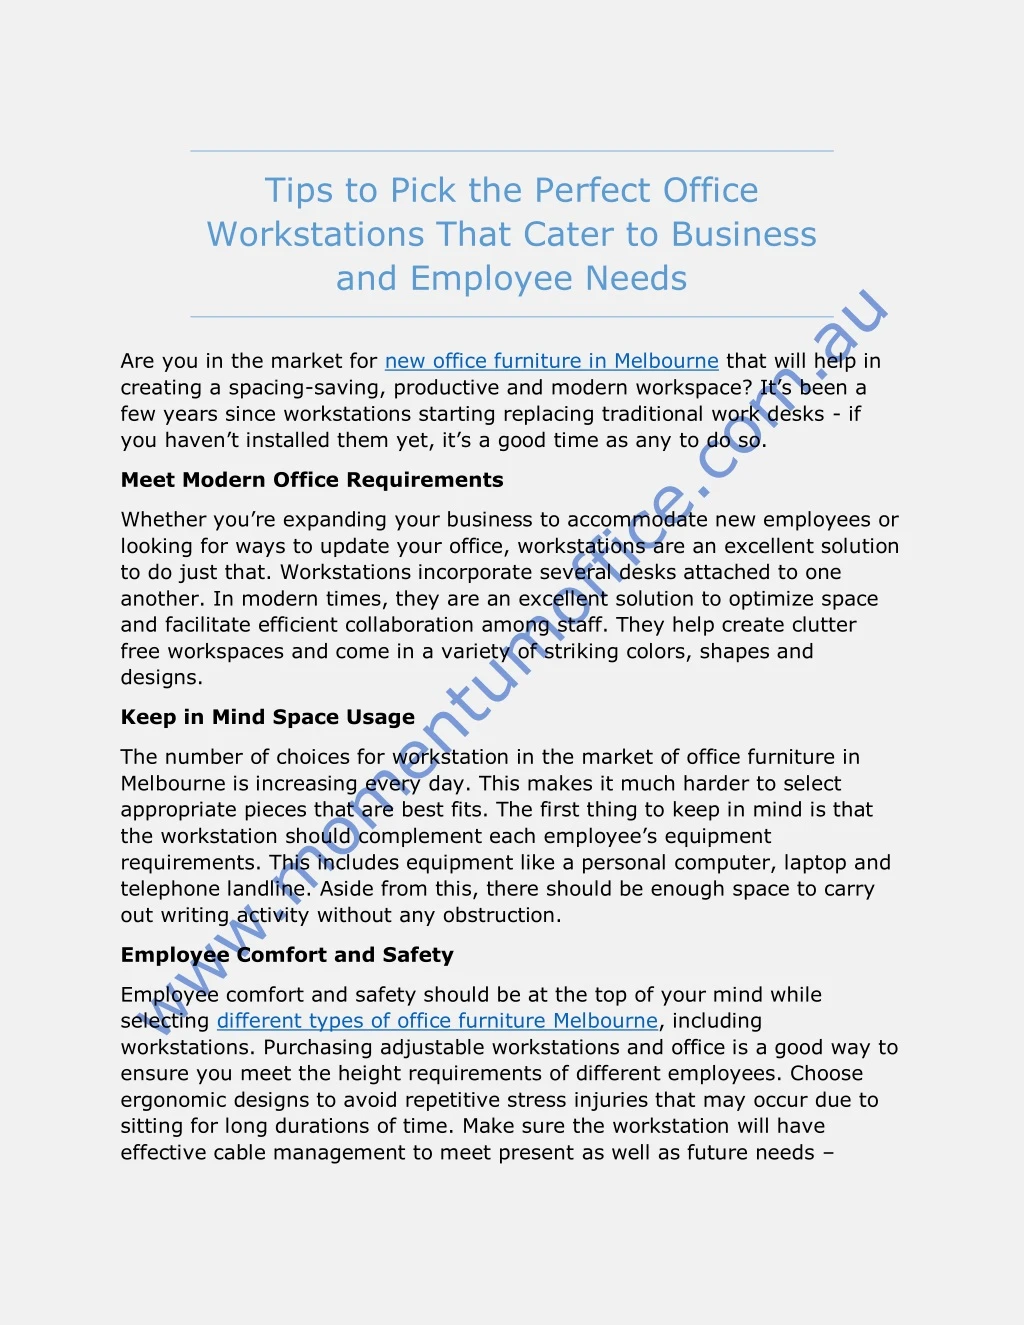 tips to pick the perfect office workstations that